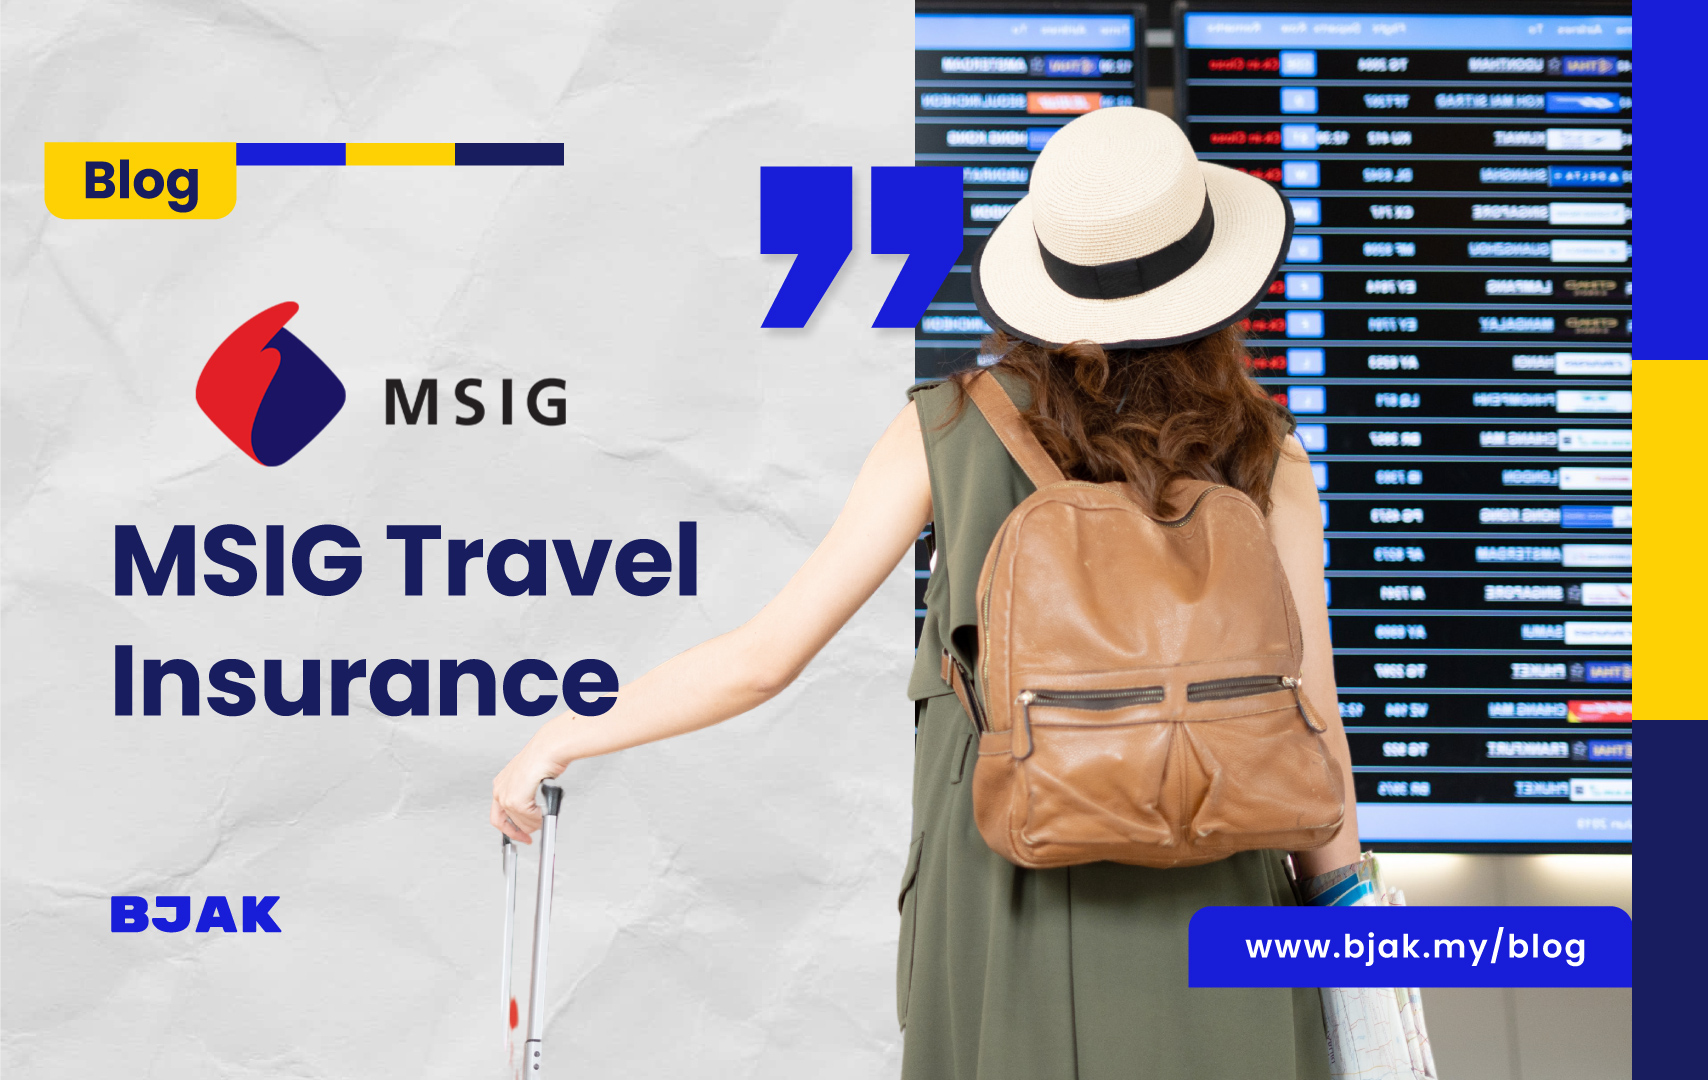 fwd or msig travel insurance